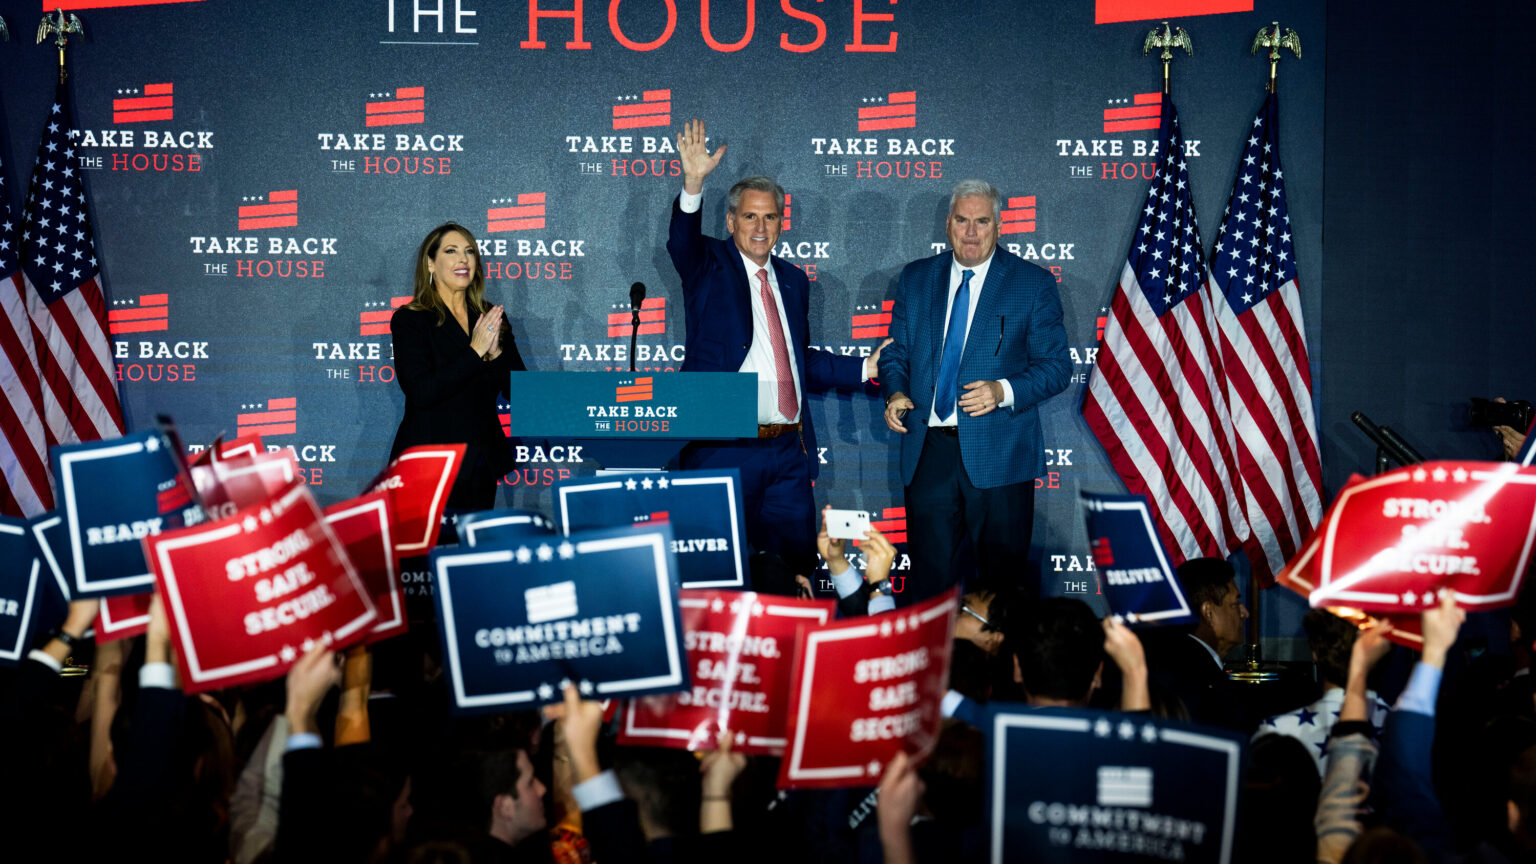 Republicans closer to taking The House